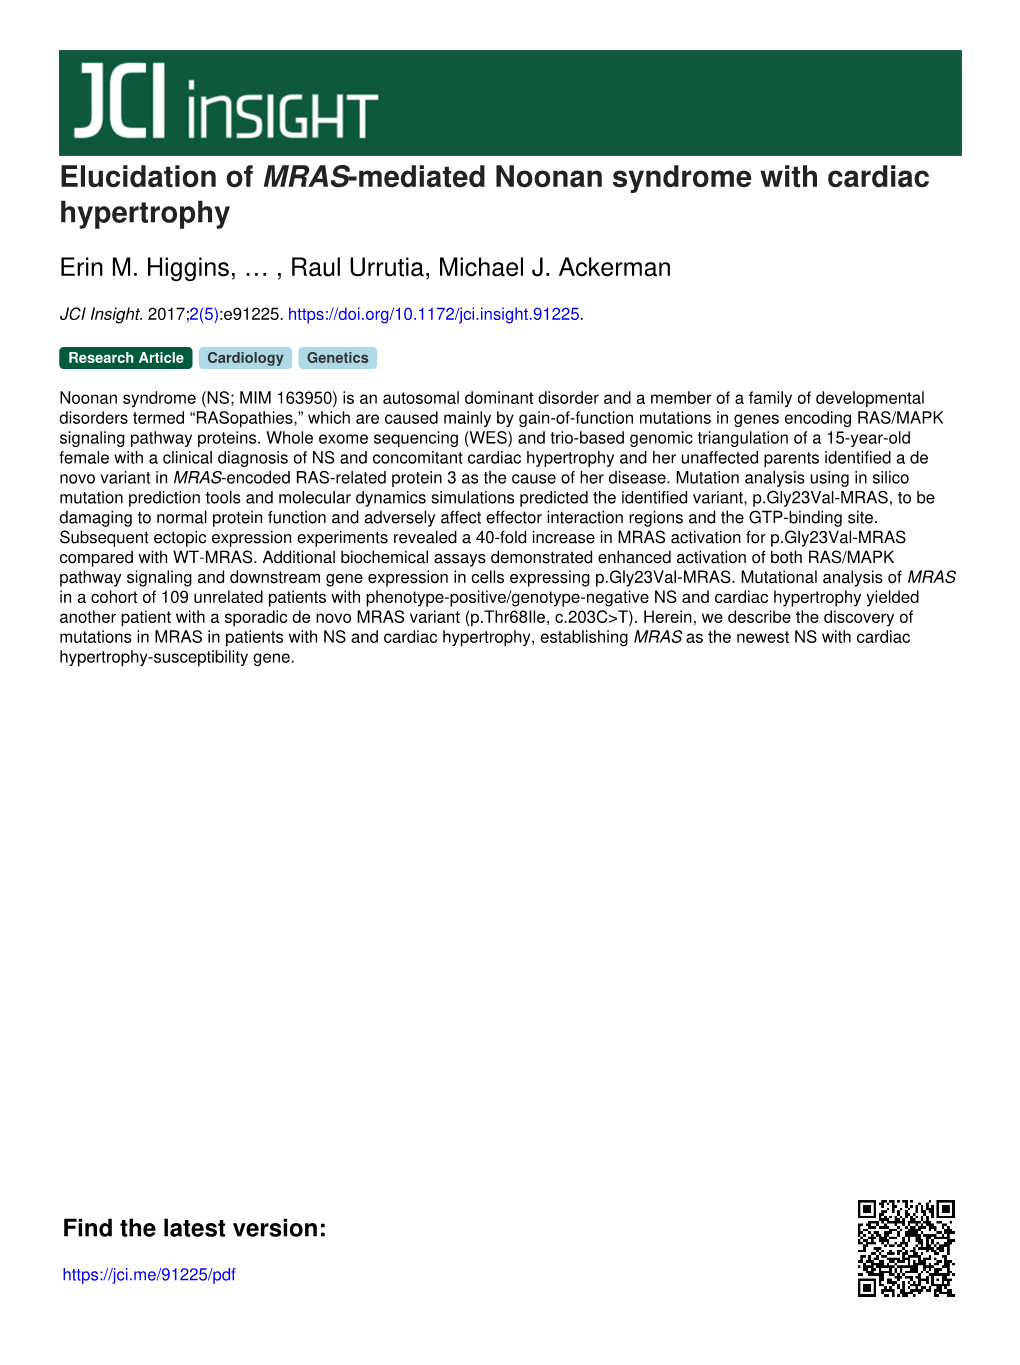 Elucidation of MRAS-Mediated Noonan Syndrome with Cardiac Hypertrophy